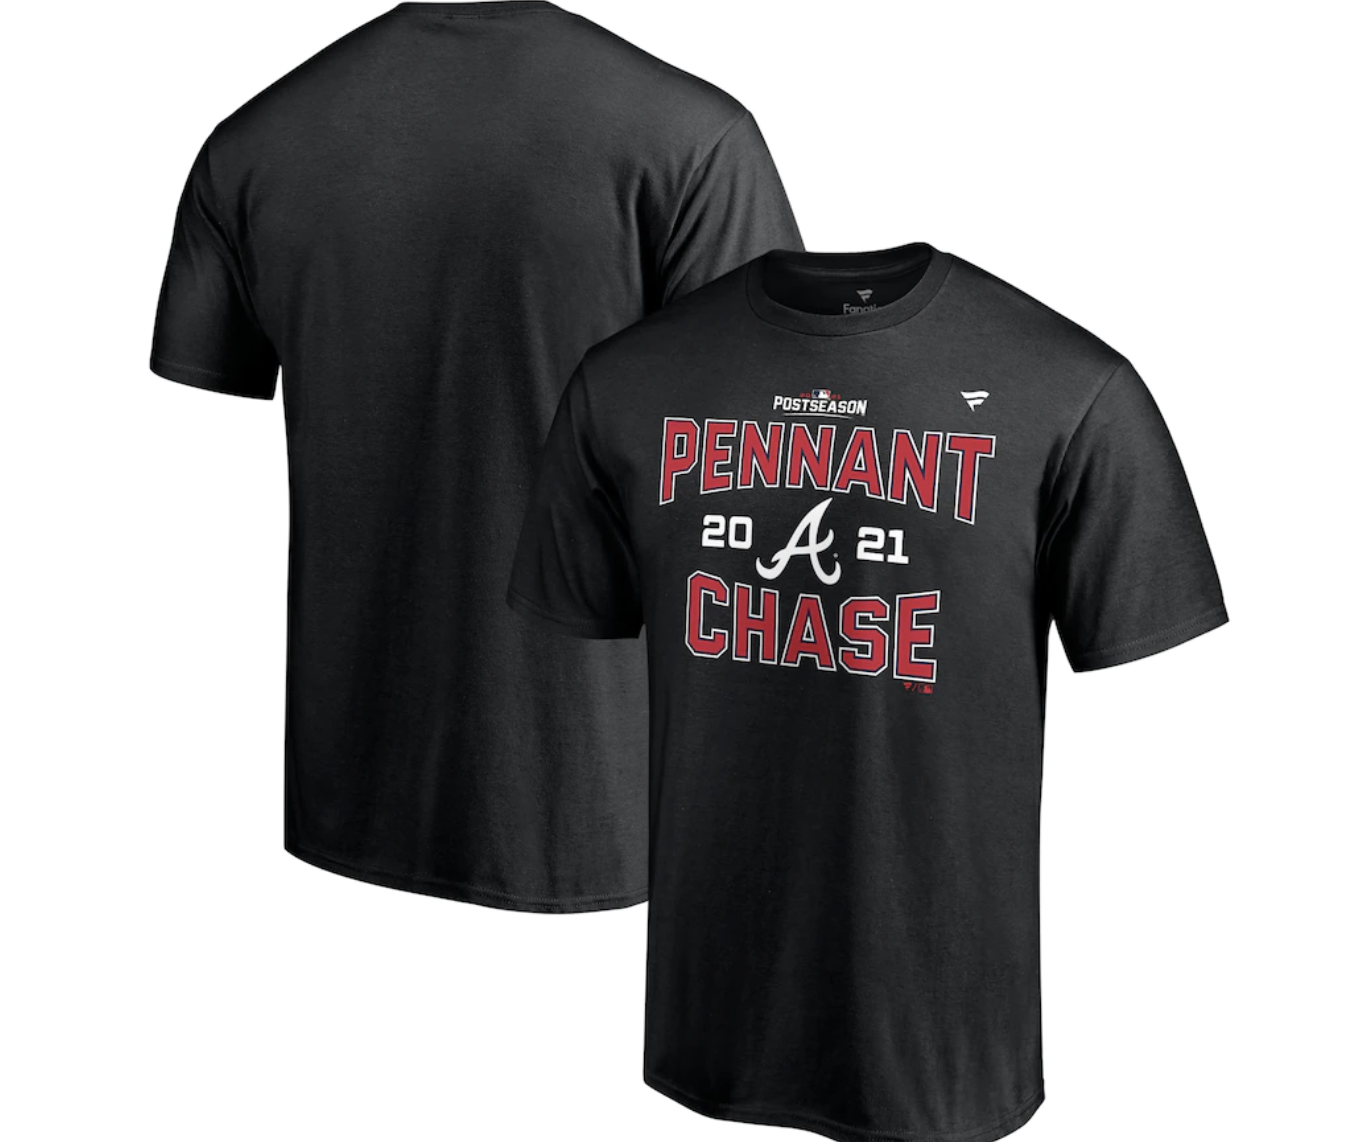 MLB Pennant Chase gear: 2021 Championship Series shirts for Red